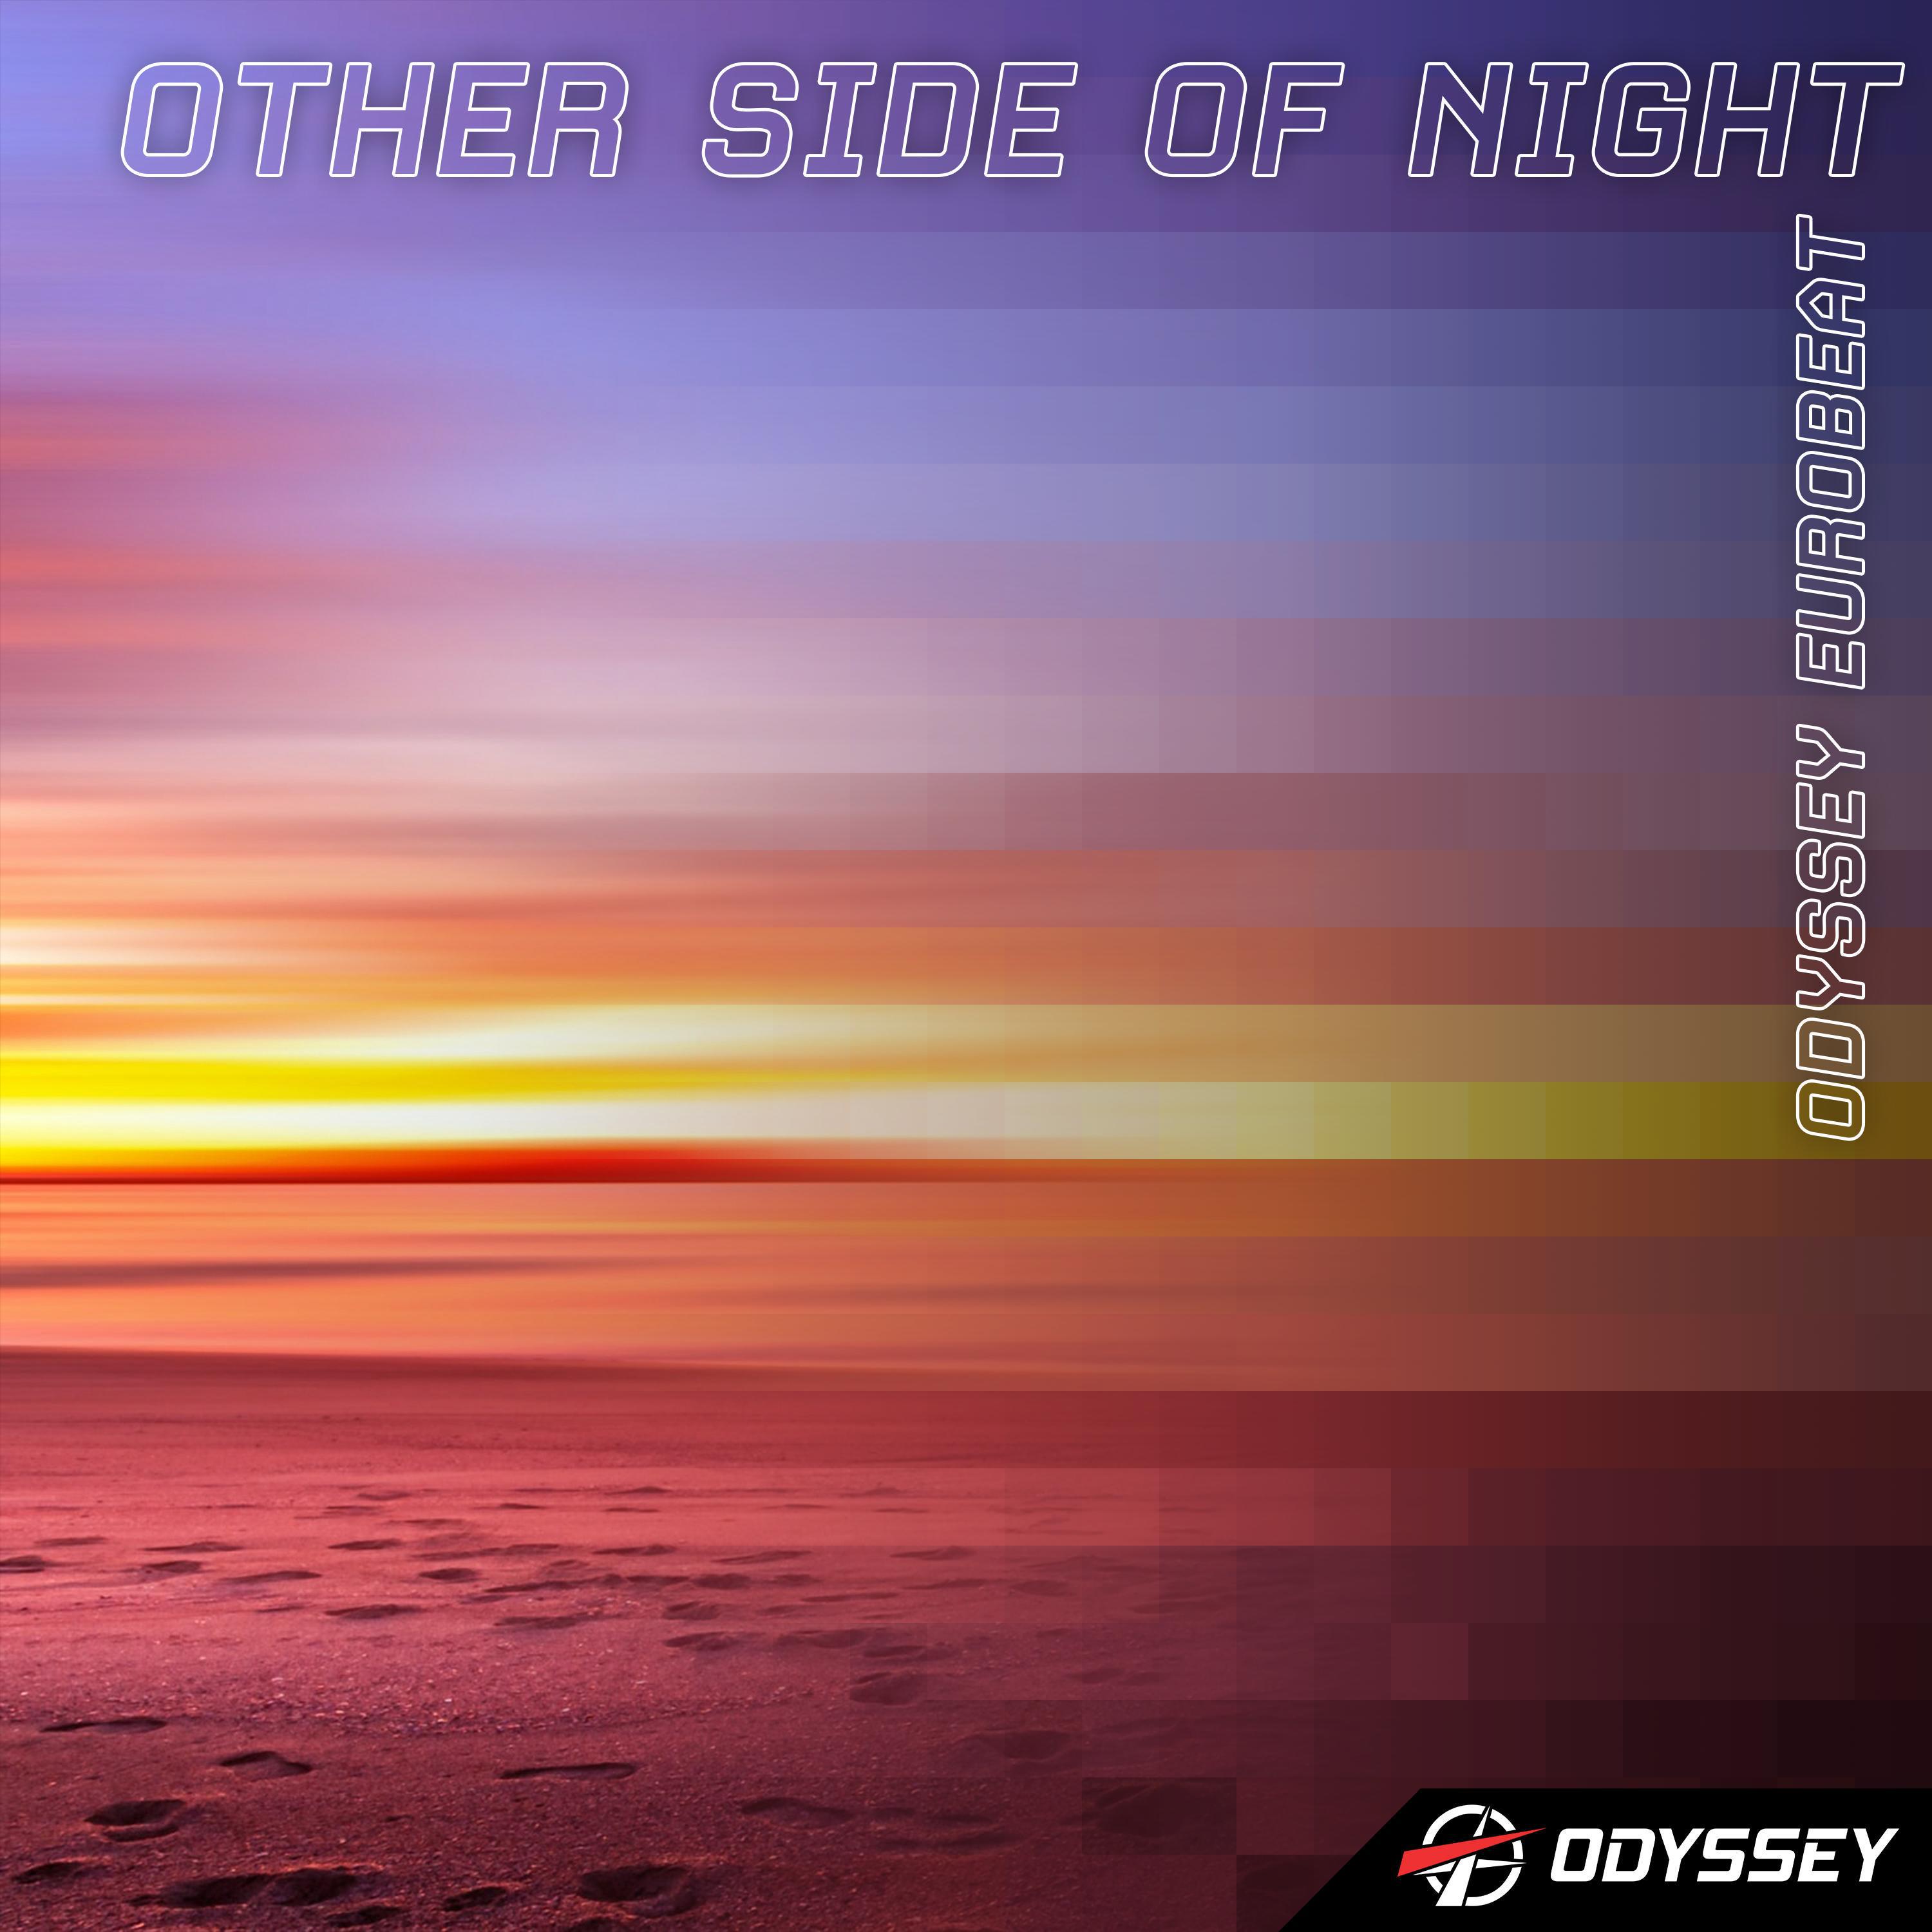 Odyssey Eurobeat - Other Side of Night (Acapella)